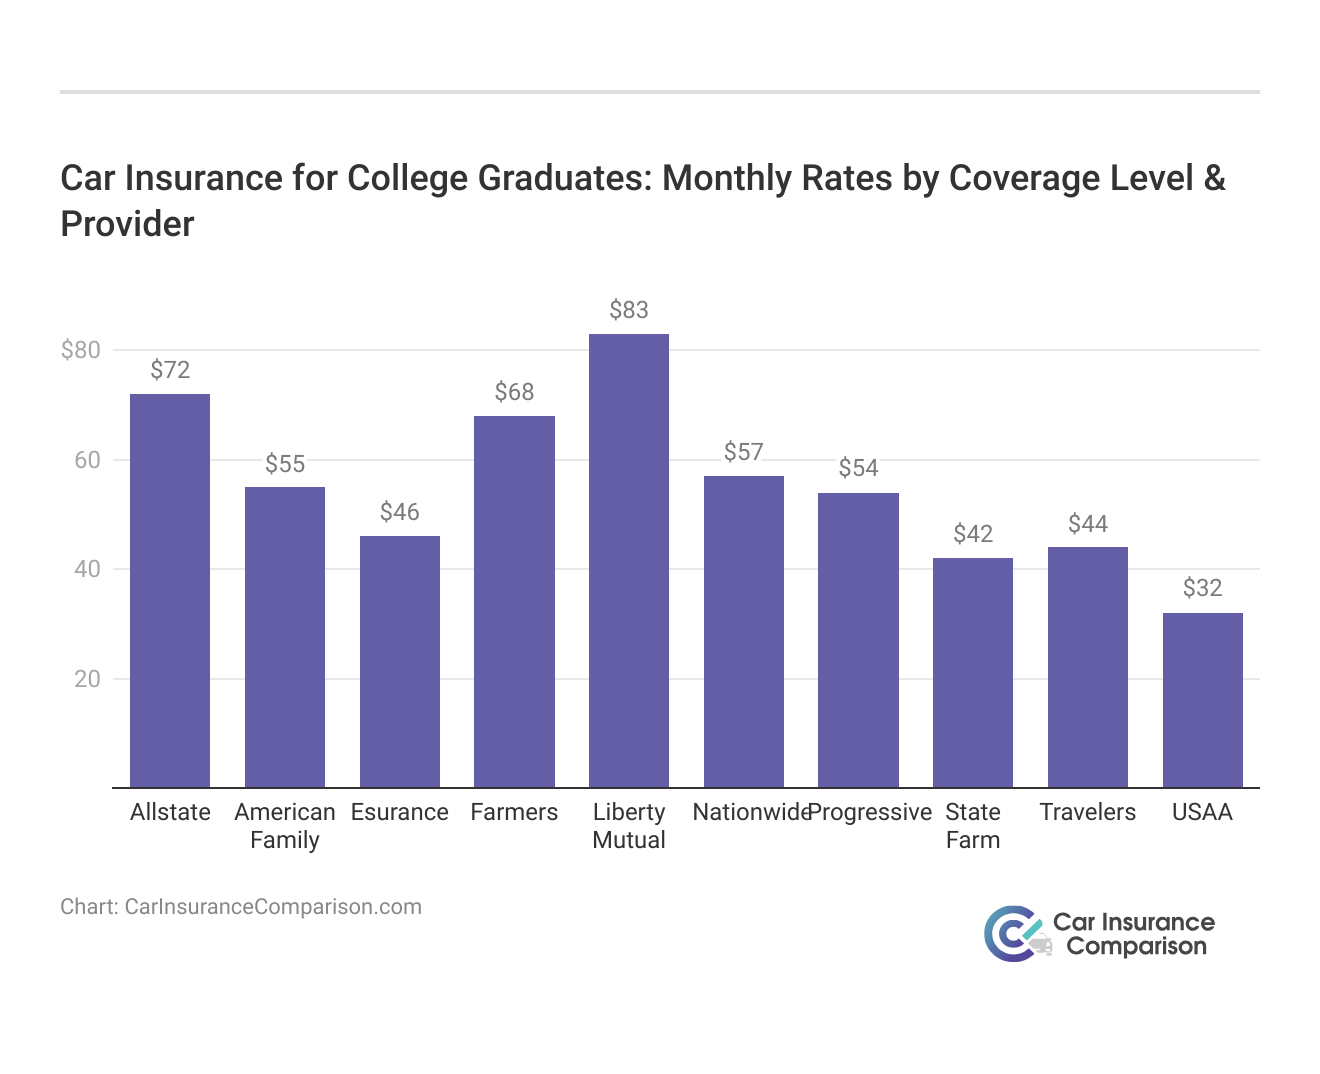 <h3>Car Insurance for College Graduates: Monthly Rates by Coverage Level & Provider</h3>